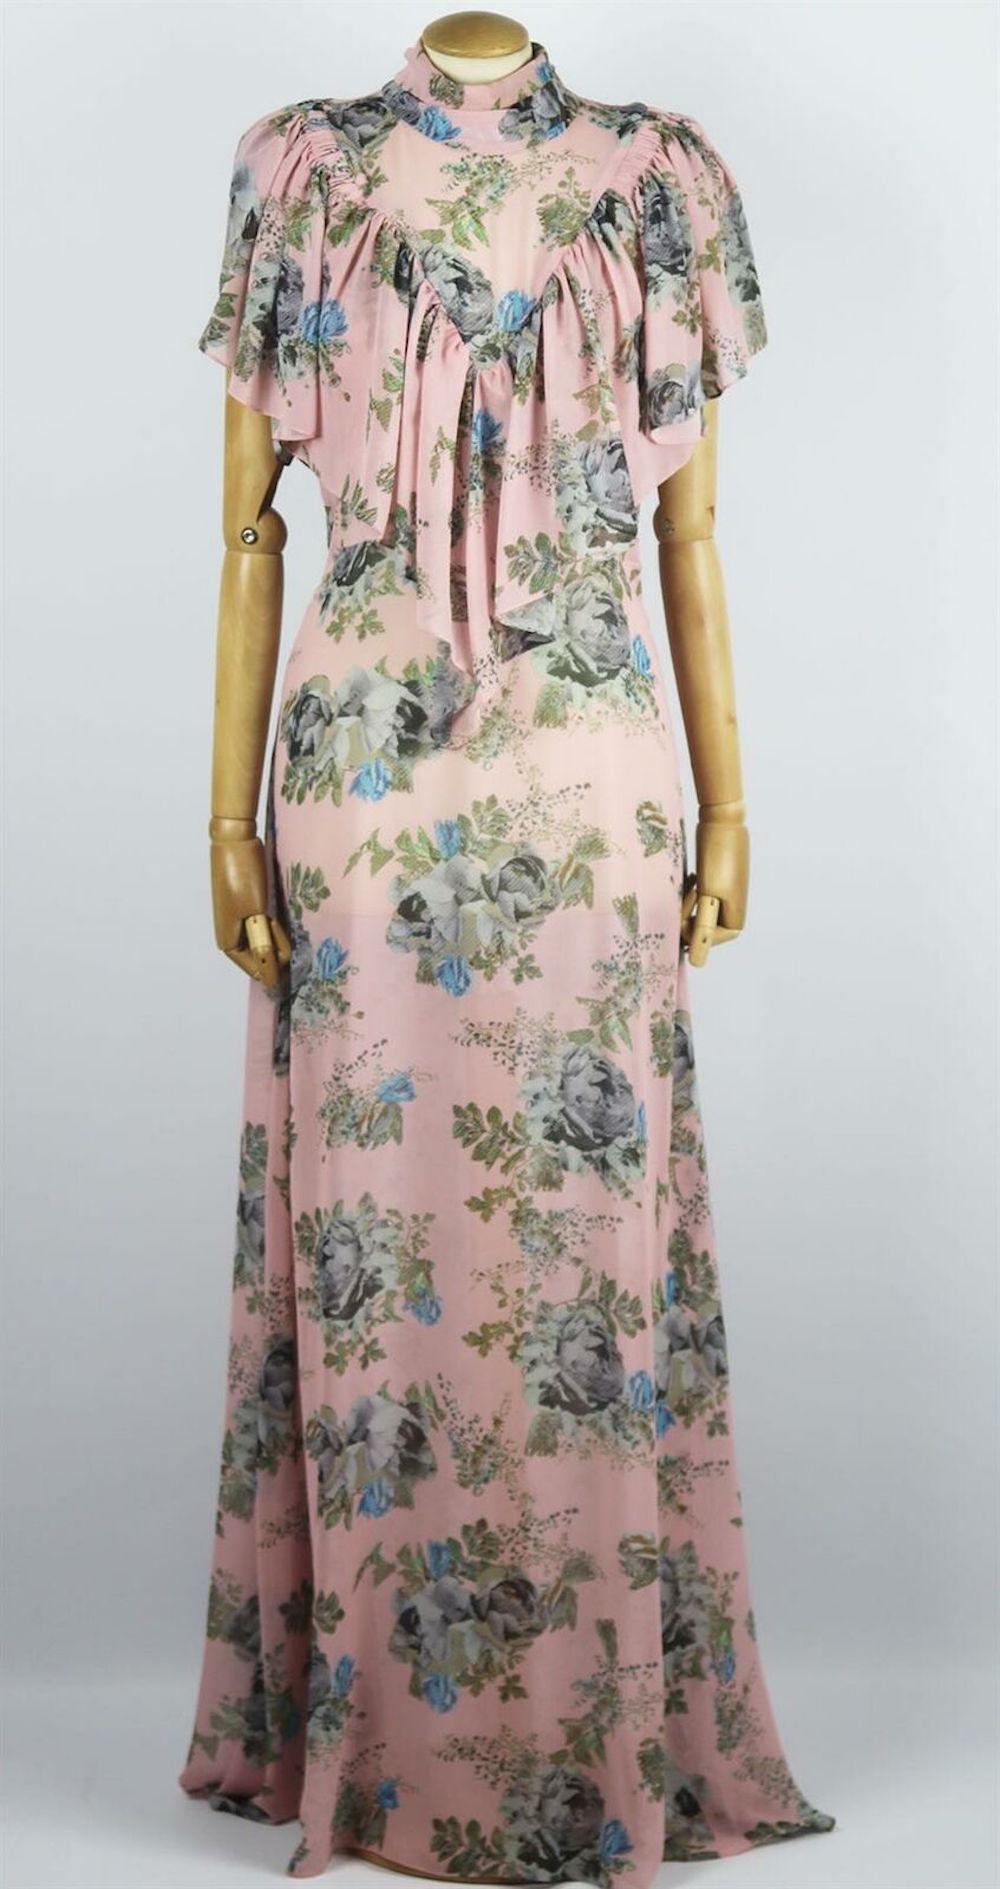 Preen by Thornton Bregazzi's maxi dress is decorated with the same floral-print seen throughout the collection, cut from floaty georgette, it has a figure-skimming silhouette and romantic ruffles along the yoke. 
Multicolored